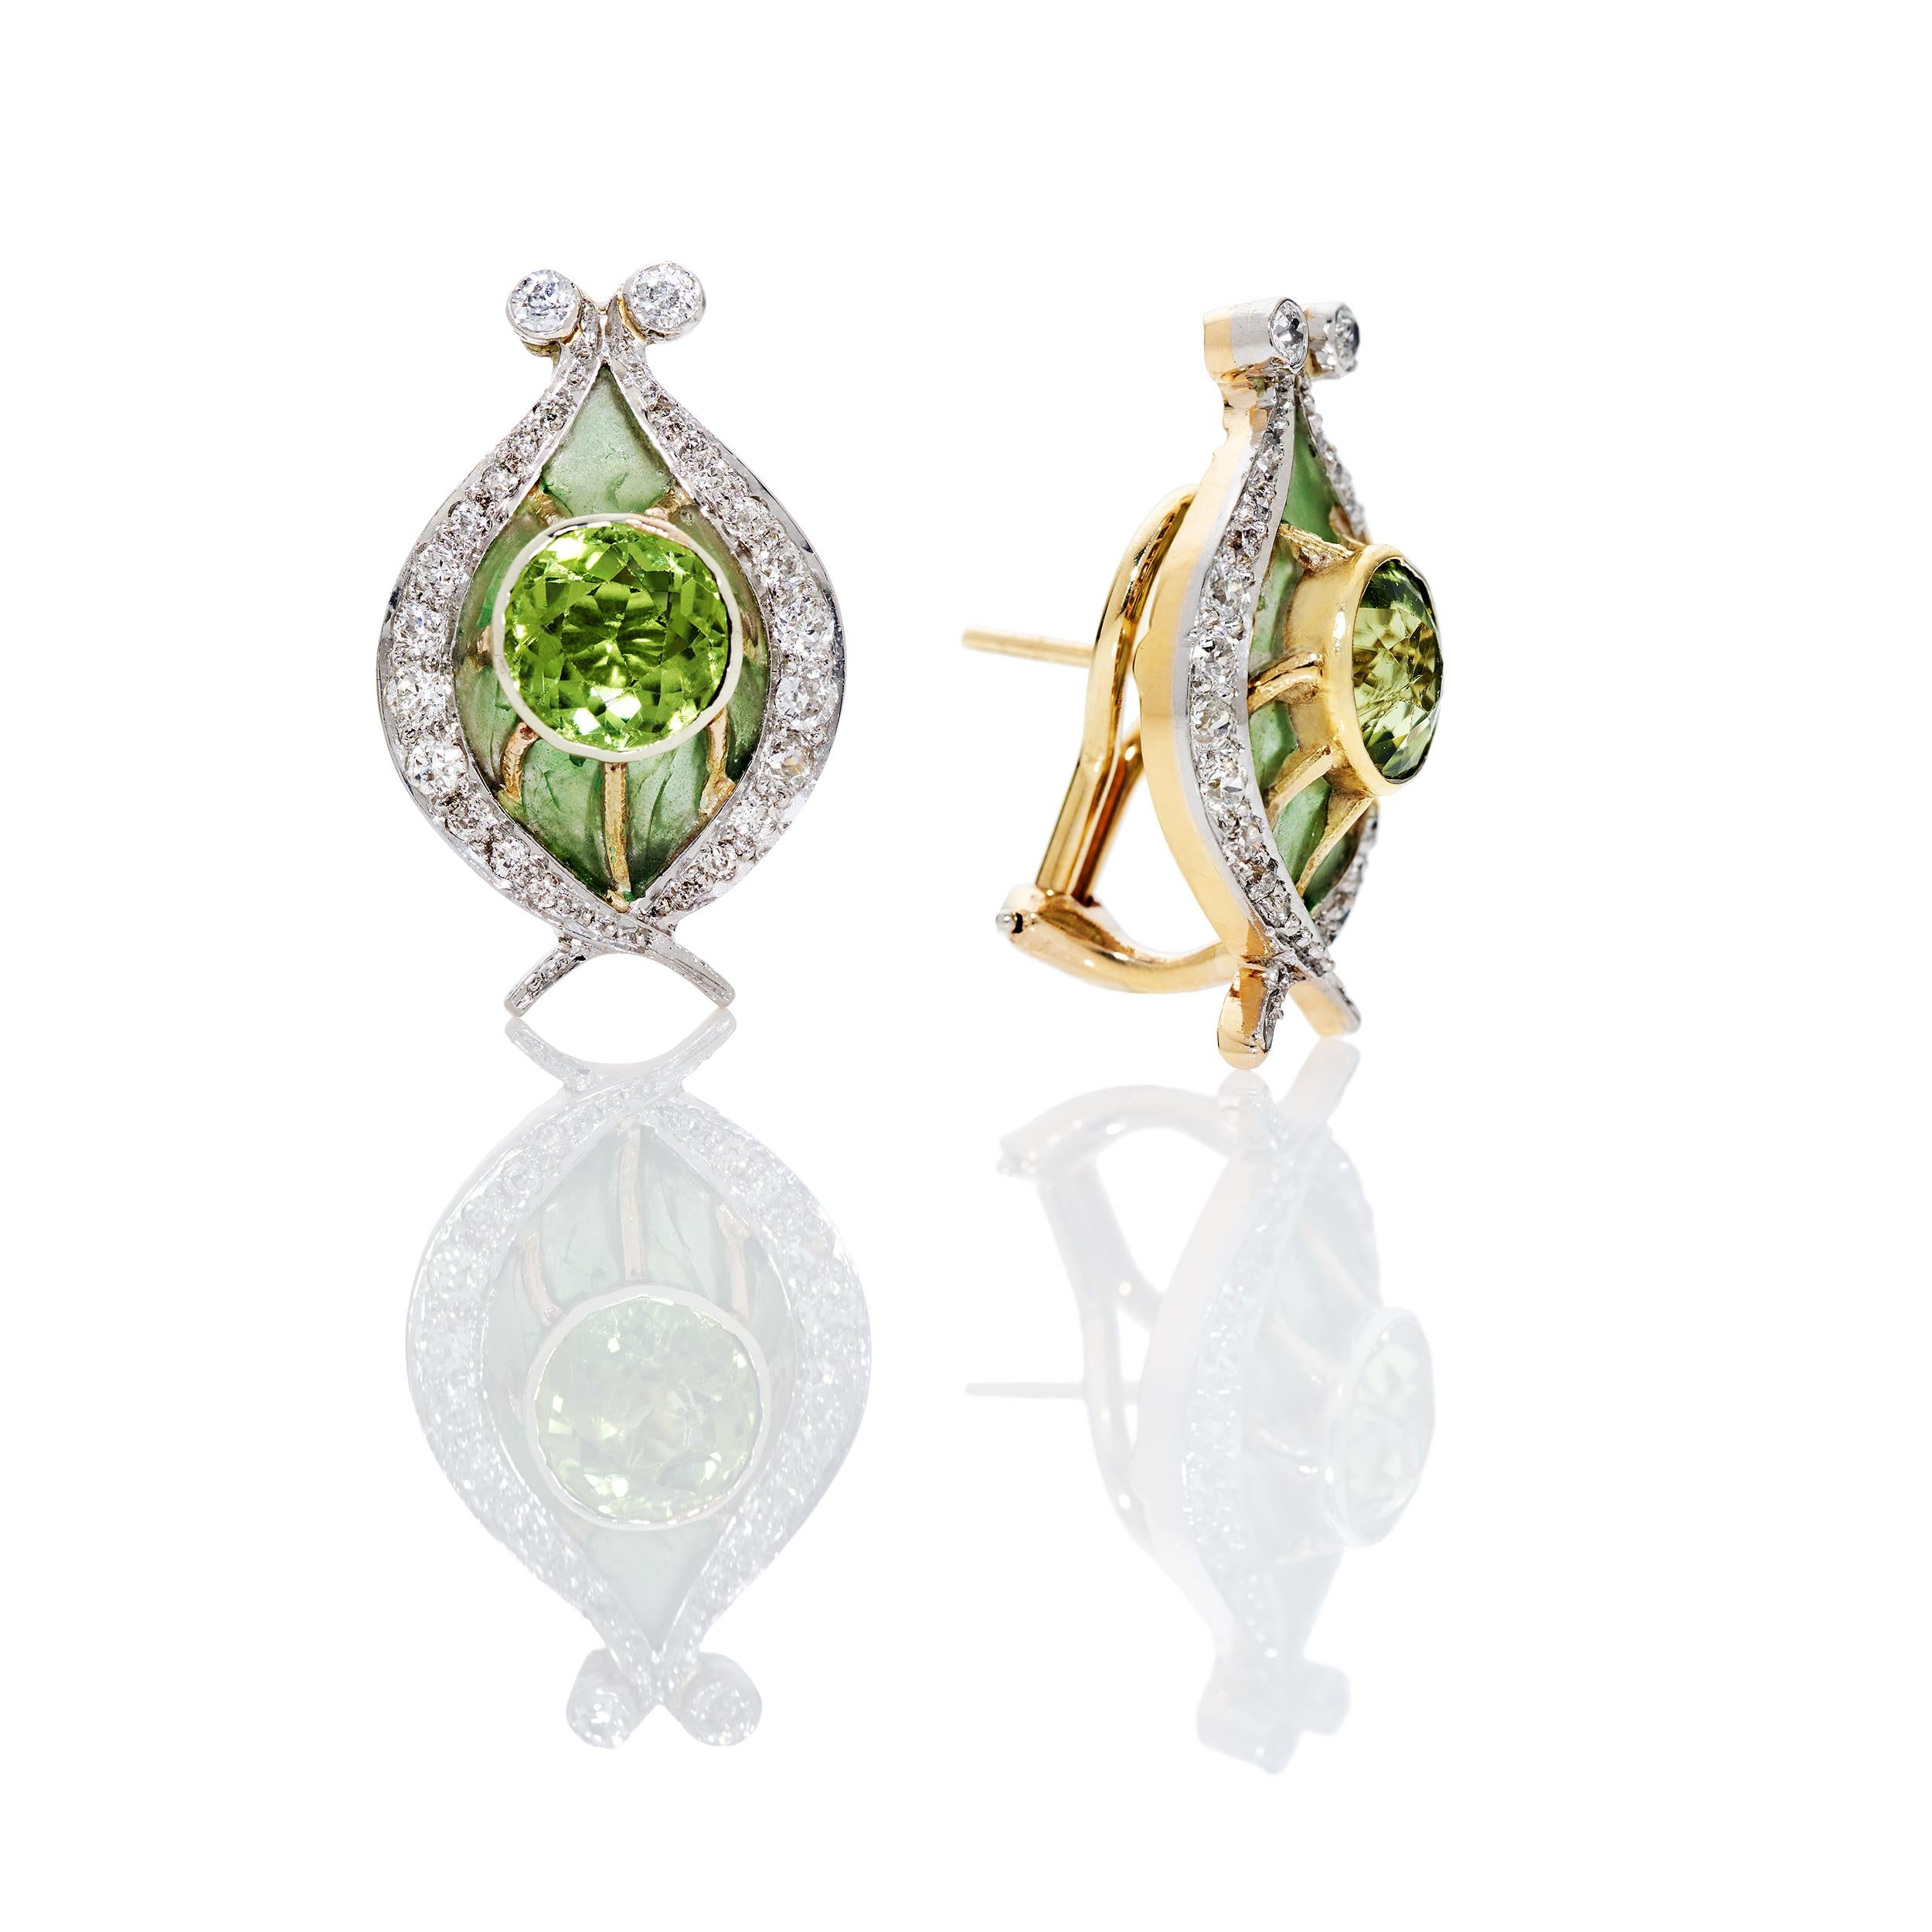 Art Nouveau Plique a Jour Earrings created between 1900 - 1910.  The earrings were made with a matching broach that was converted into a triple strand necklace listed separately.  These magnificent pieces of history have been fully restored and are